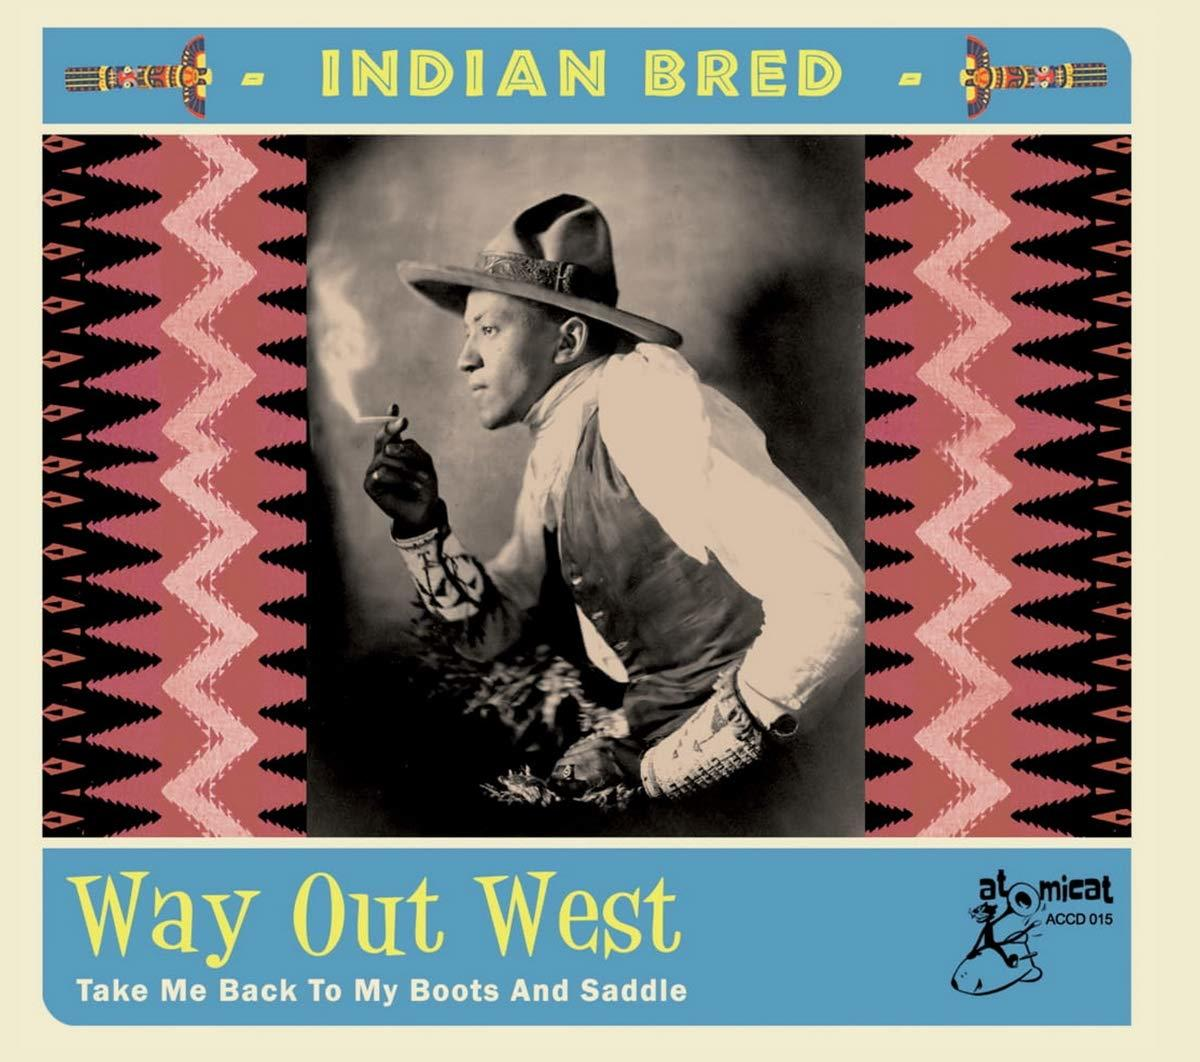 VARIOUS - Indian - (CD) Out Bred-Way West